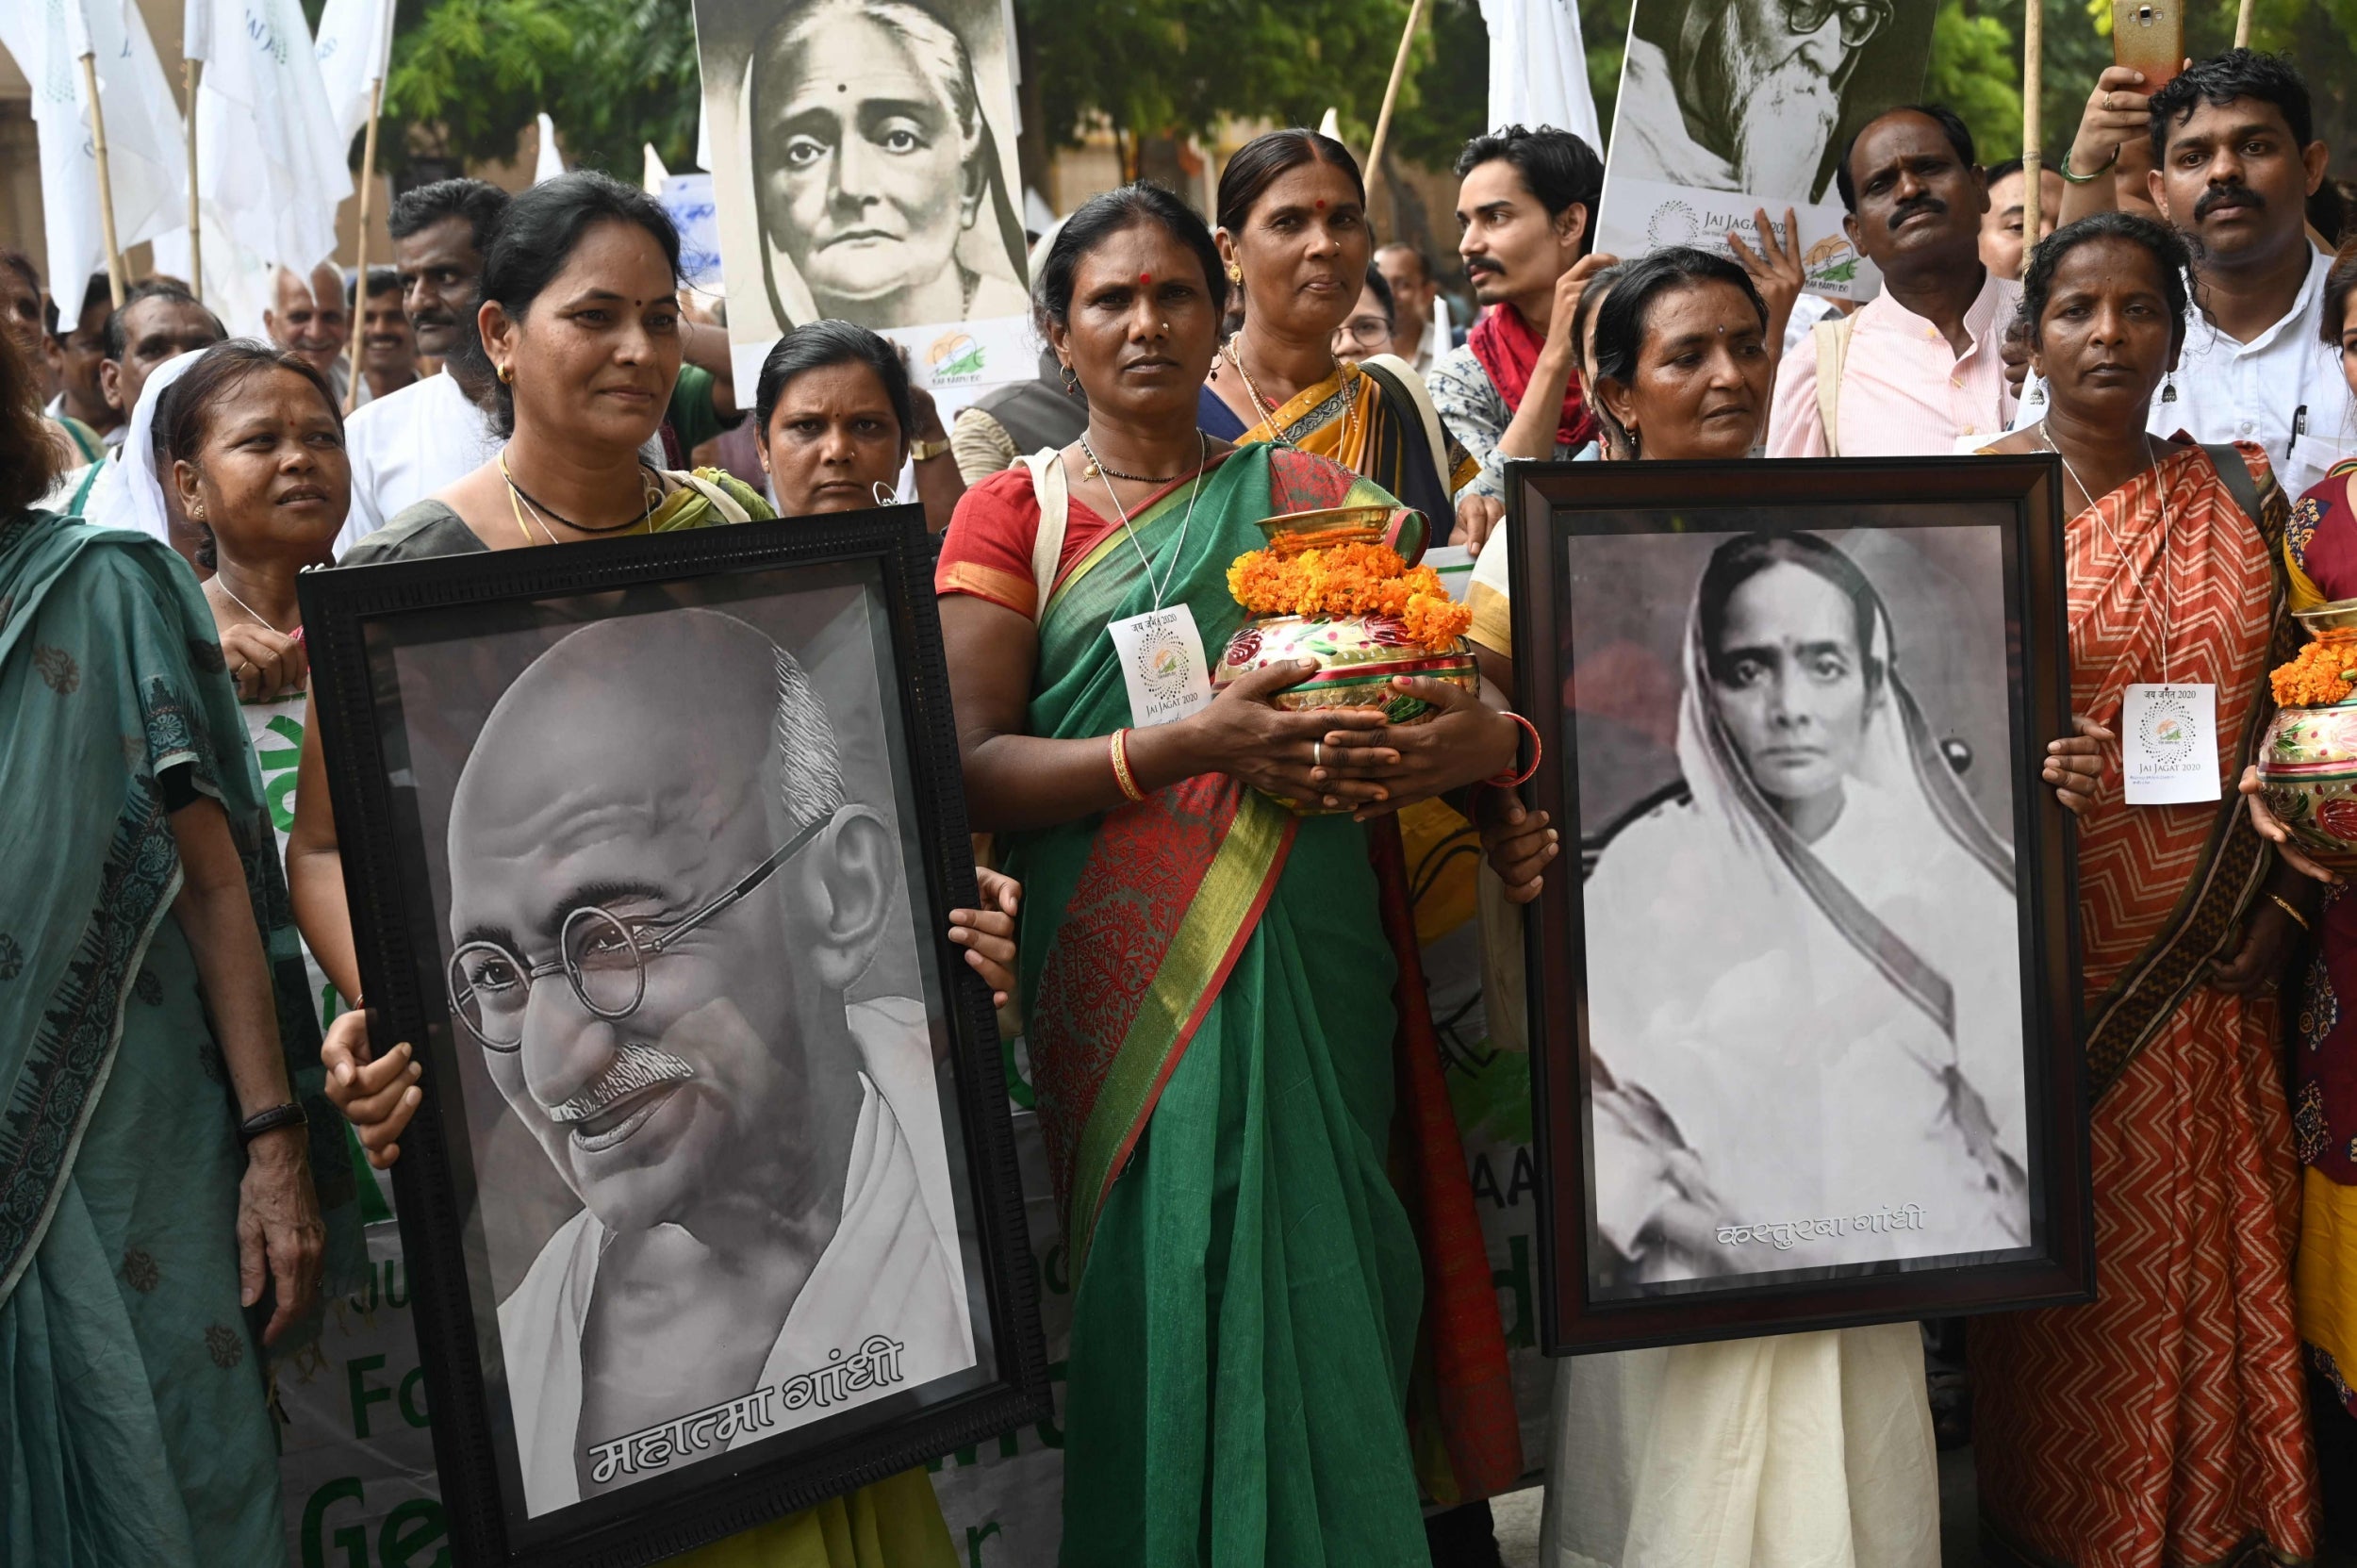 Activists hold portraits of Indian independence icon Mahatma Gandhi and his wife Kasturba Gandhi as they mark his 150th birth anniversary with a peace march from Delhi to Geneva